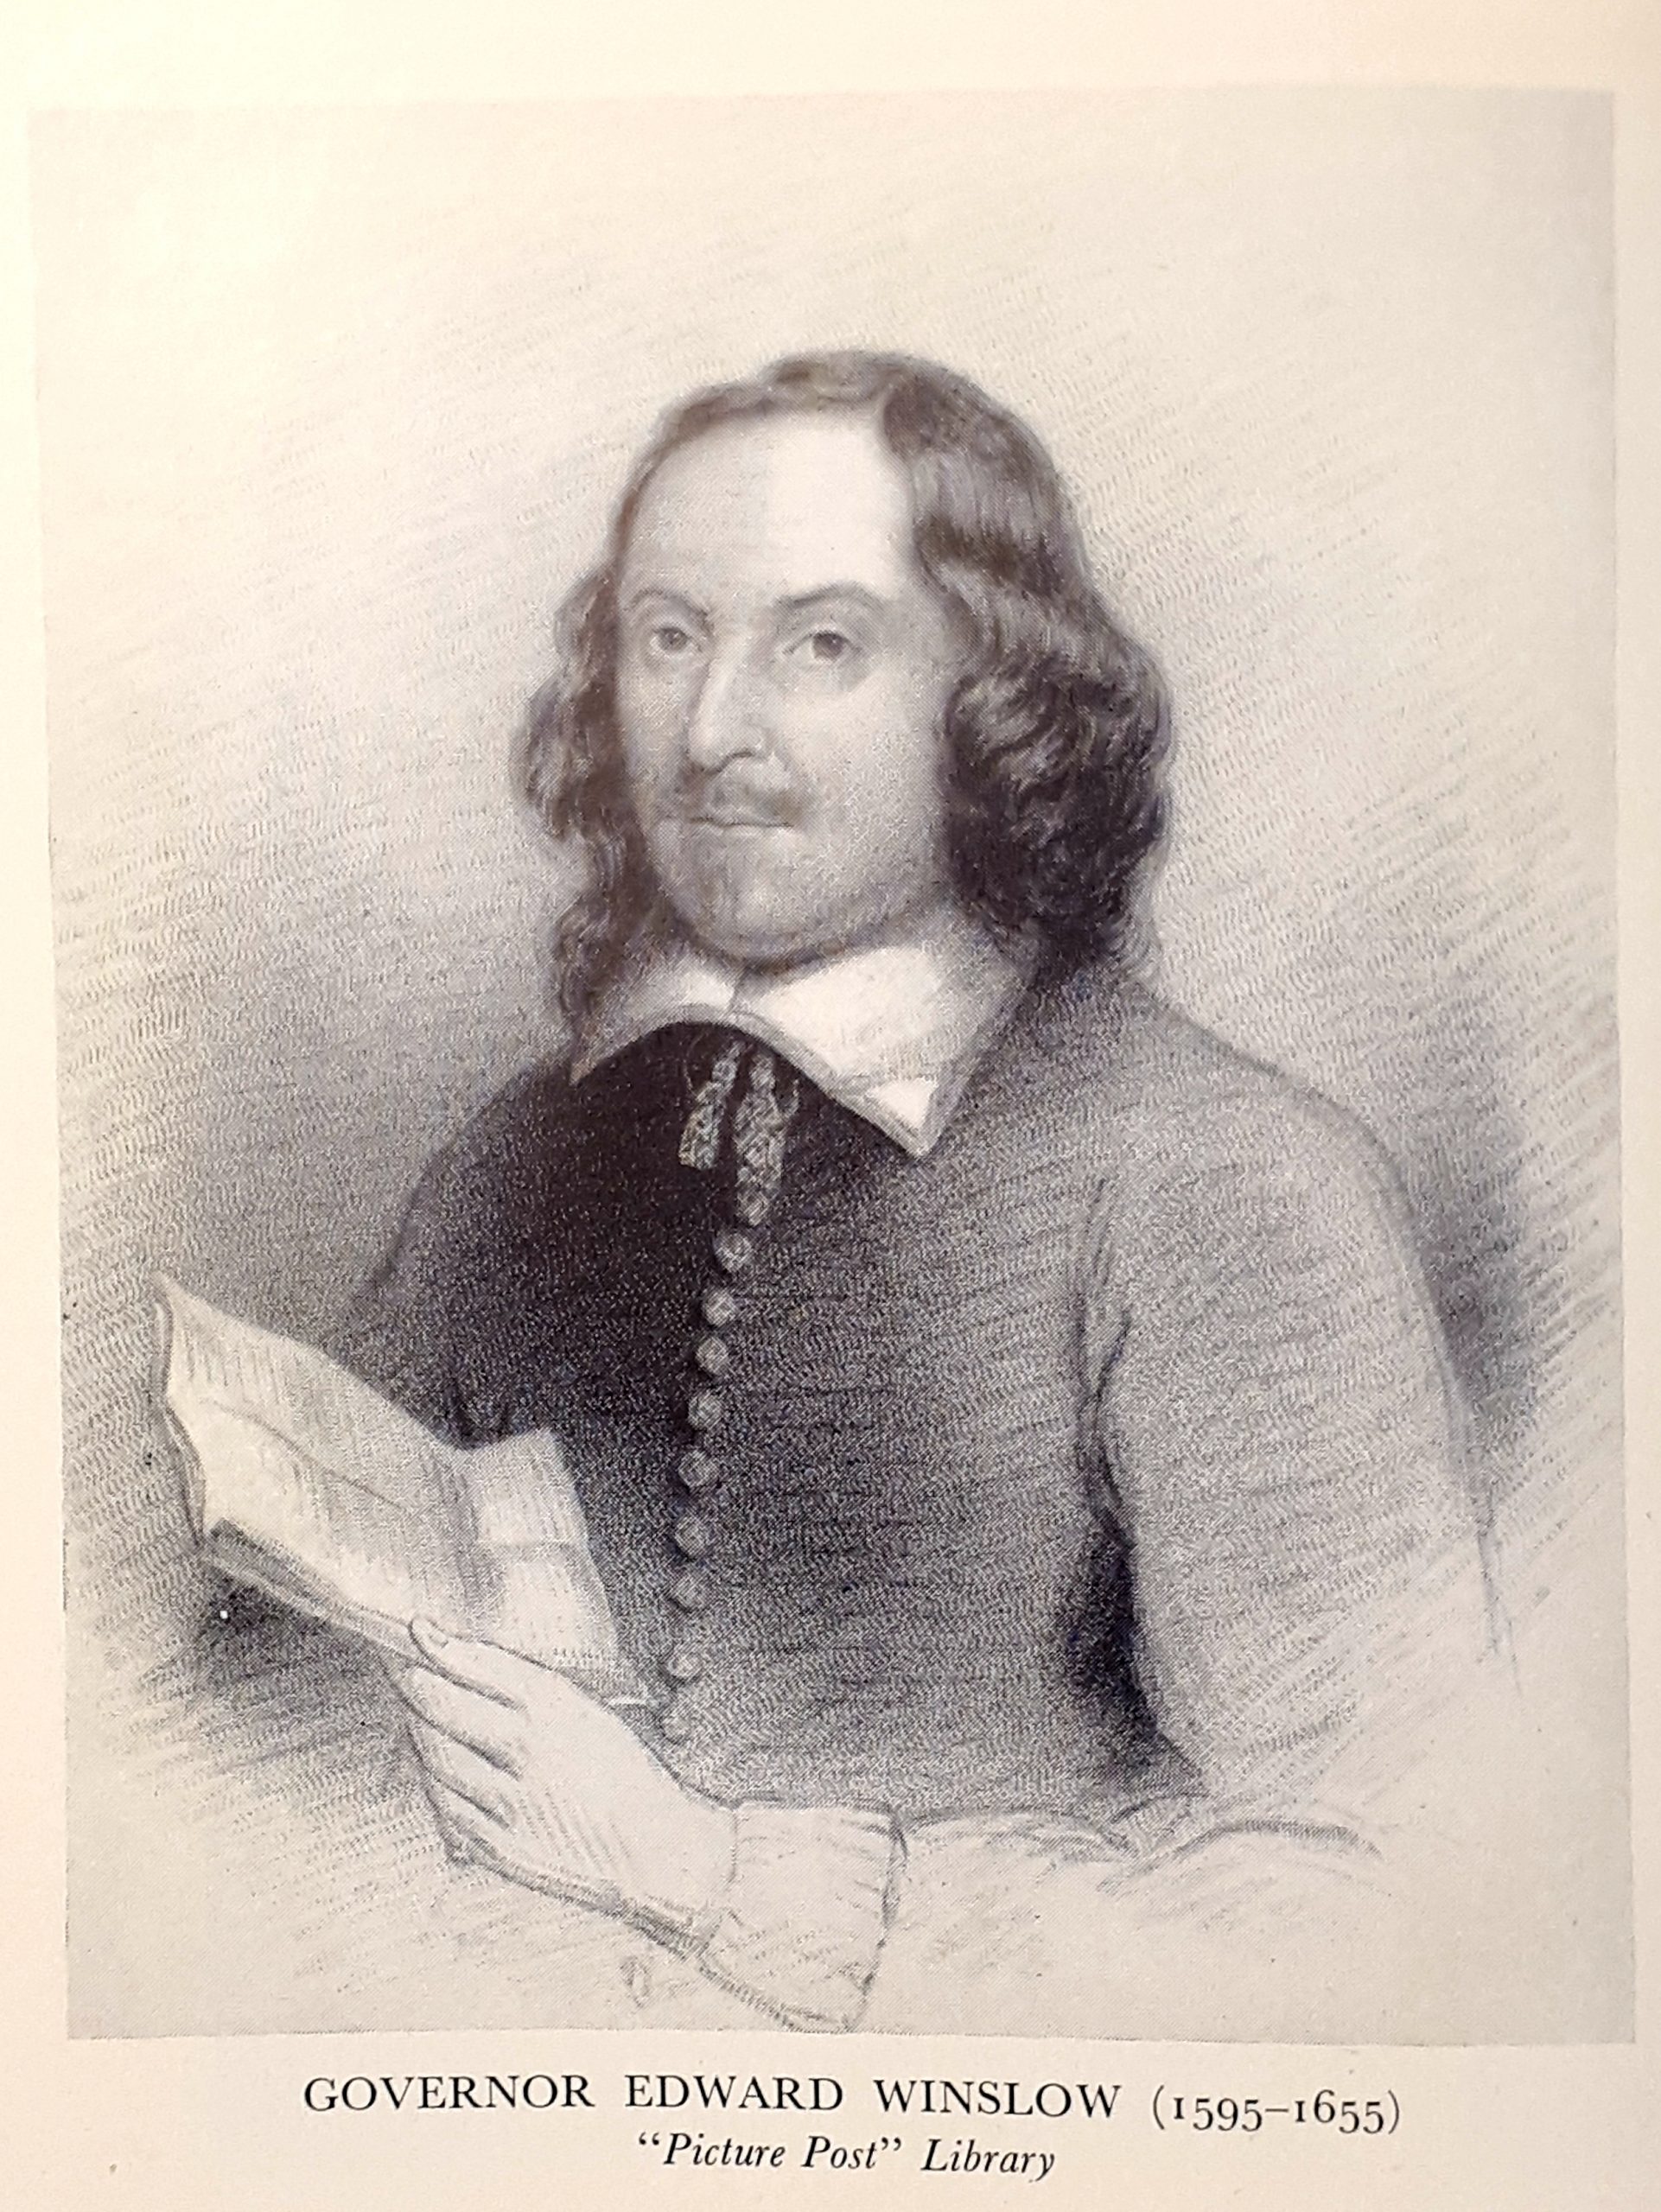 Governor Edward Winslow (1595-1655) 'Picture Post' Library in © D. Kenelm Winslow, 1957